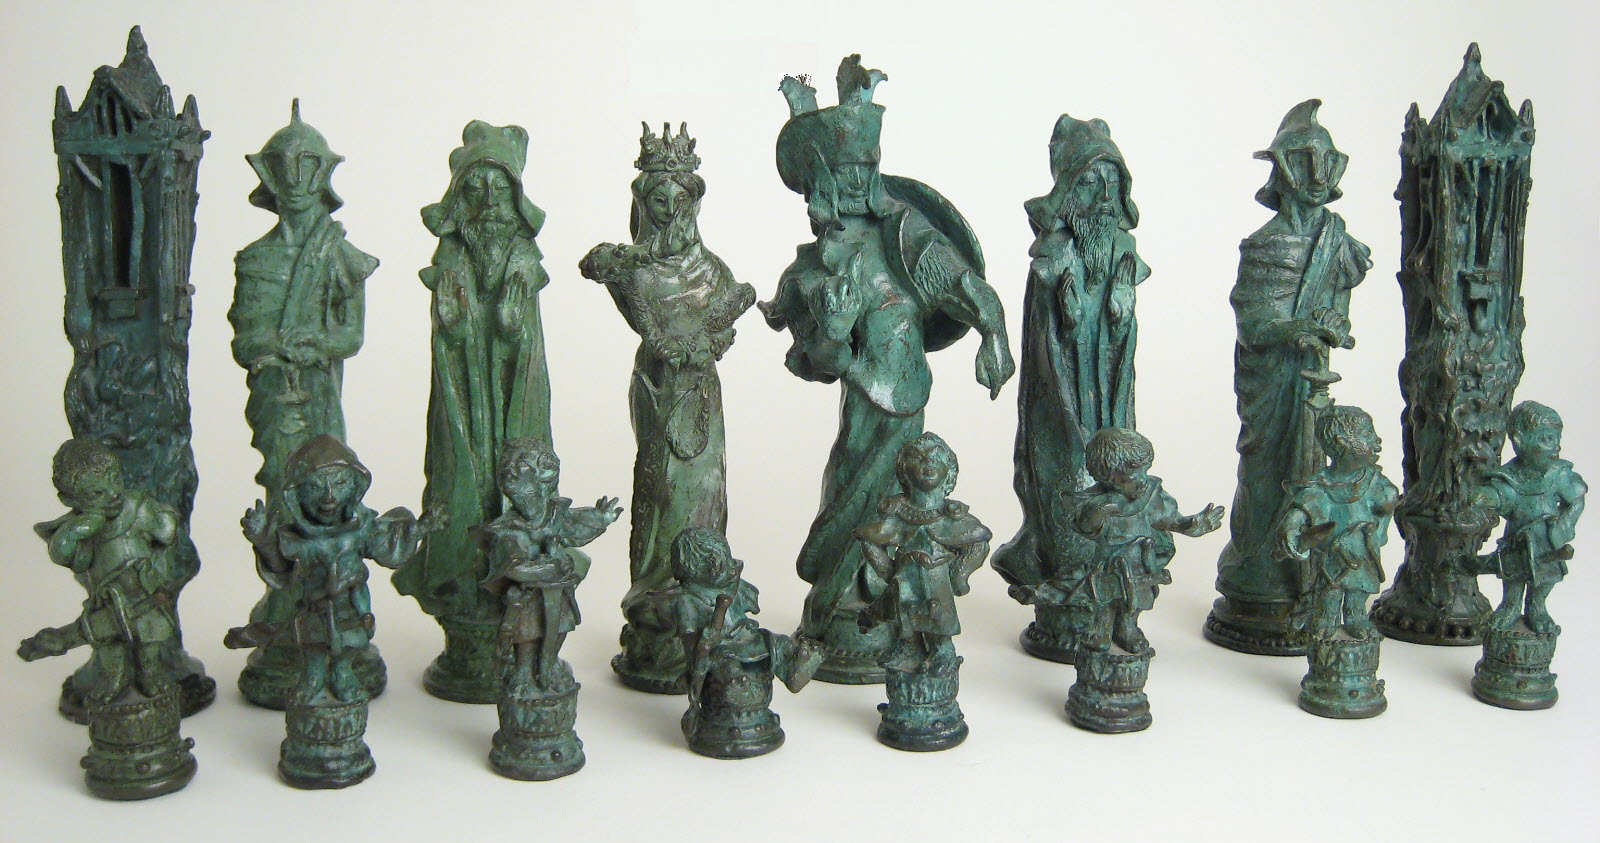 White pieces from the Bill Girard Lord of the Rings Chess Set (Bronze)